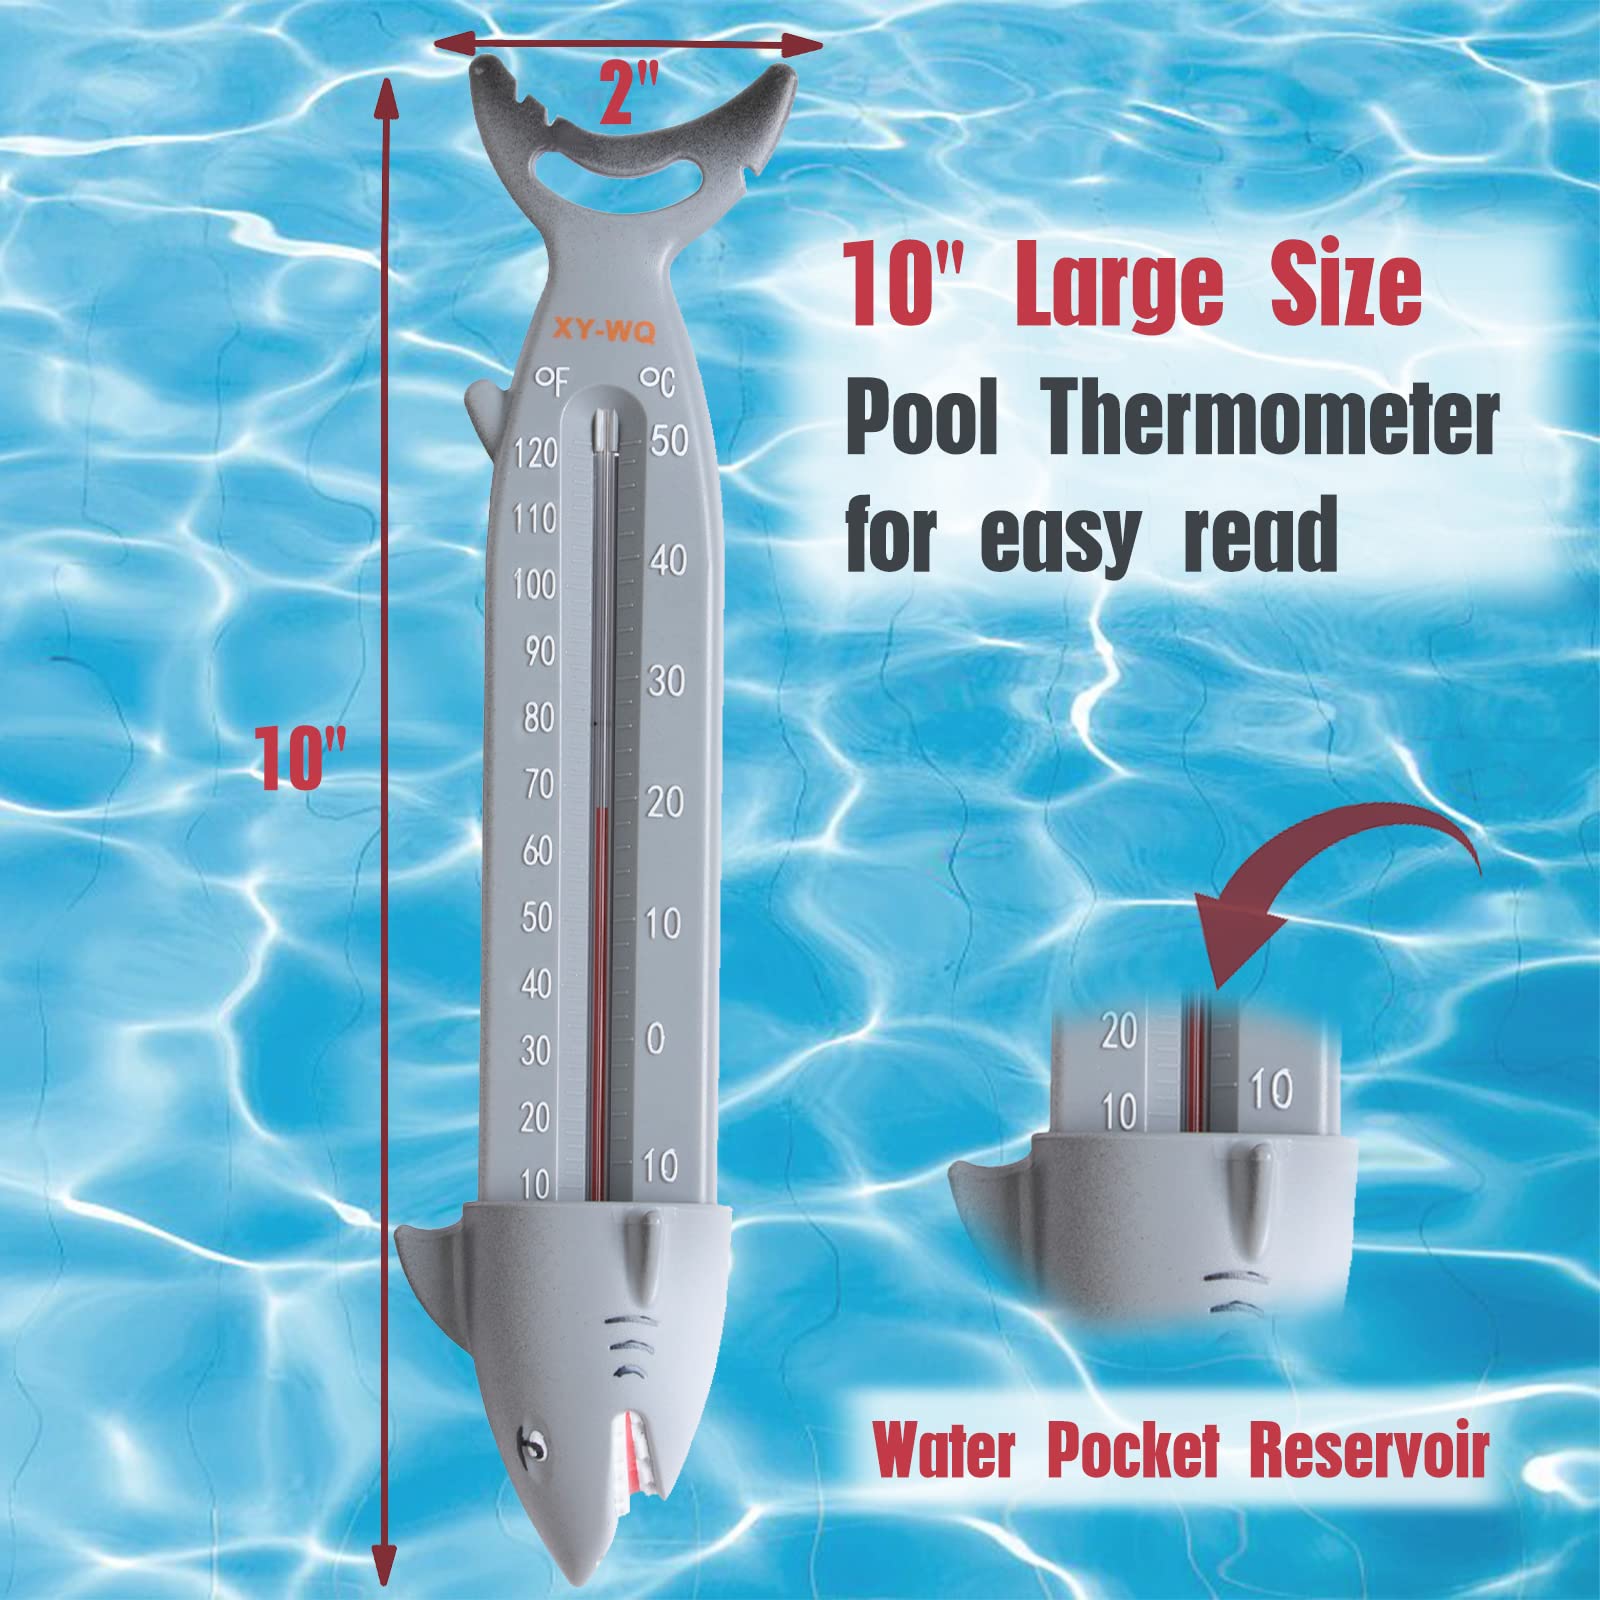 XY-WQ Large Pool Thermometer, Jumbo Easy Read for Water Temperature, Sinking for Accurate Readings - Swimming Pools, Spas, Hot Tubs, Ponds (Shark)